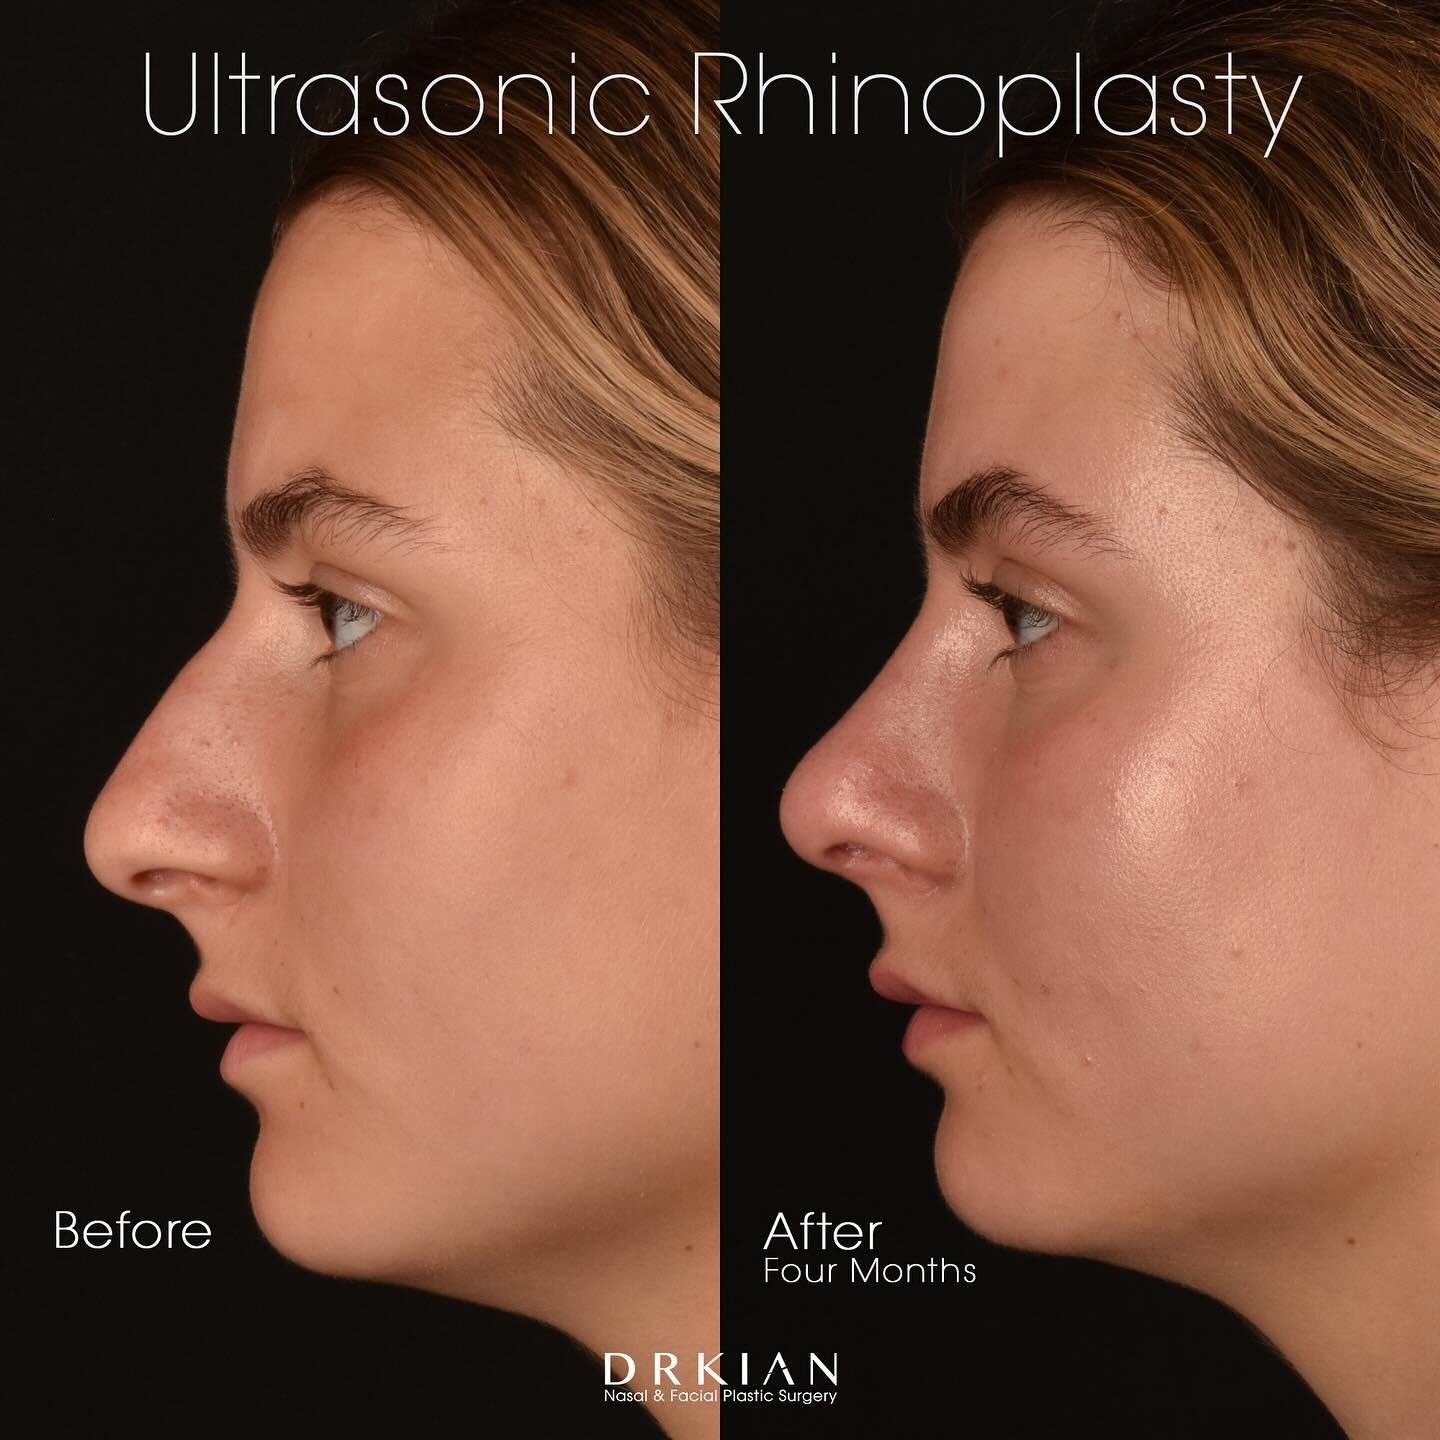 During consultation my younger female patient shared how her side profile, nostril asymmetry and bump contributed to her overall unhappiness with her nose. She desired a more feminine and refined outcome to improve her facial balance and symmetry. Us